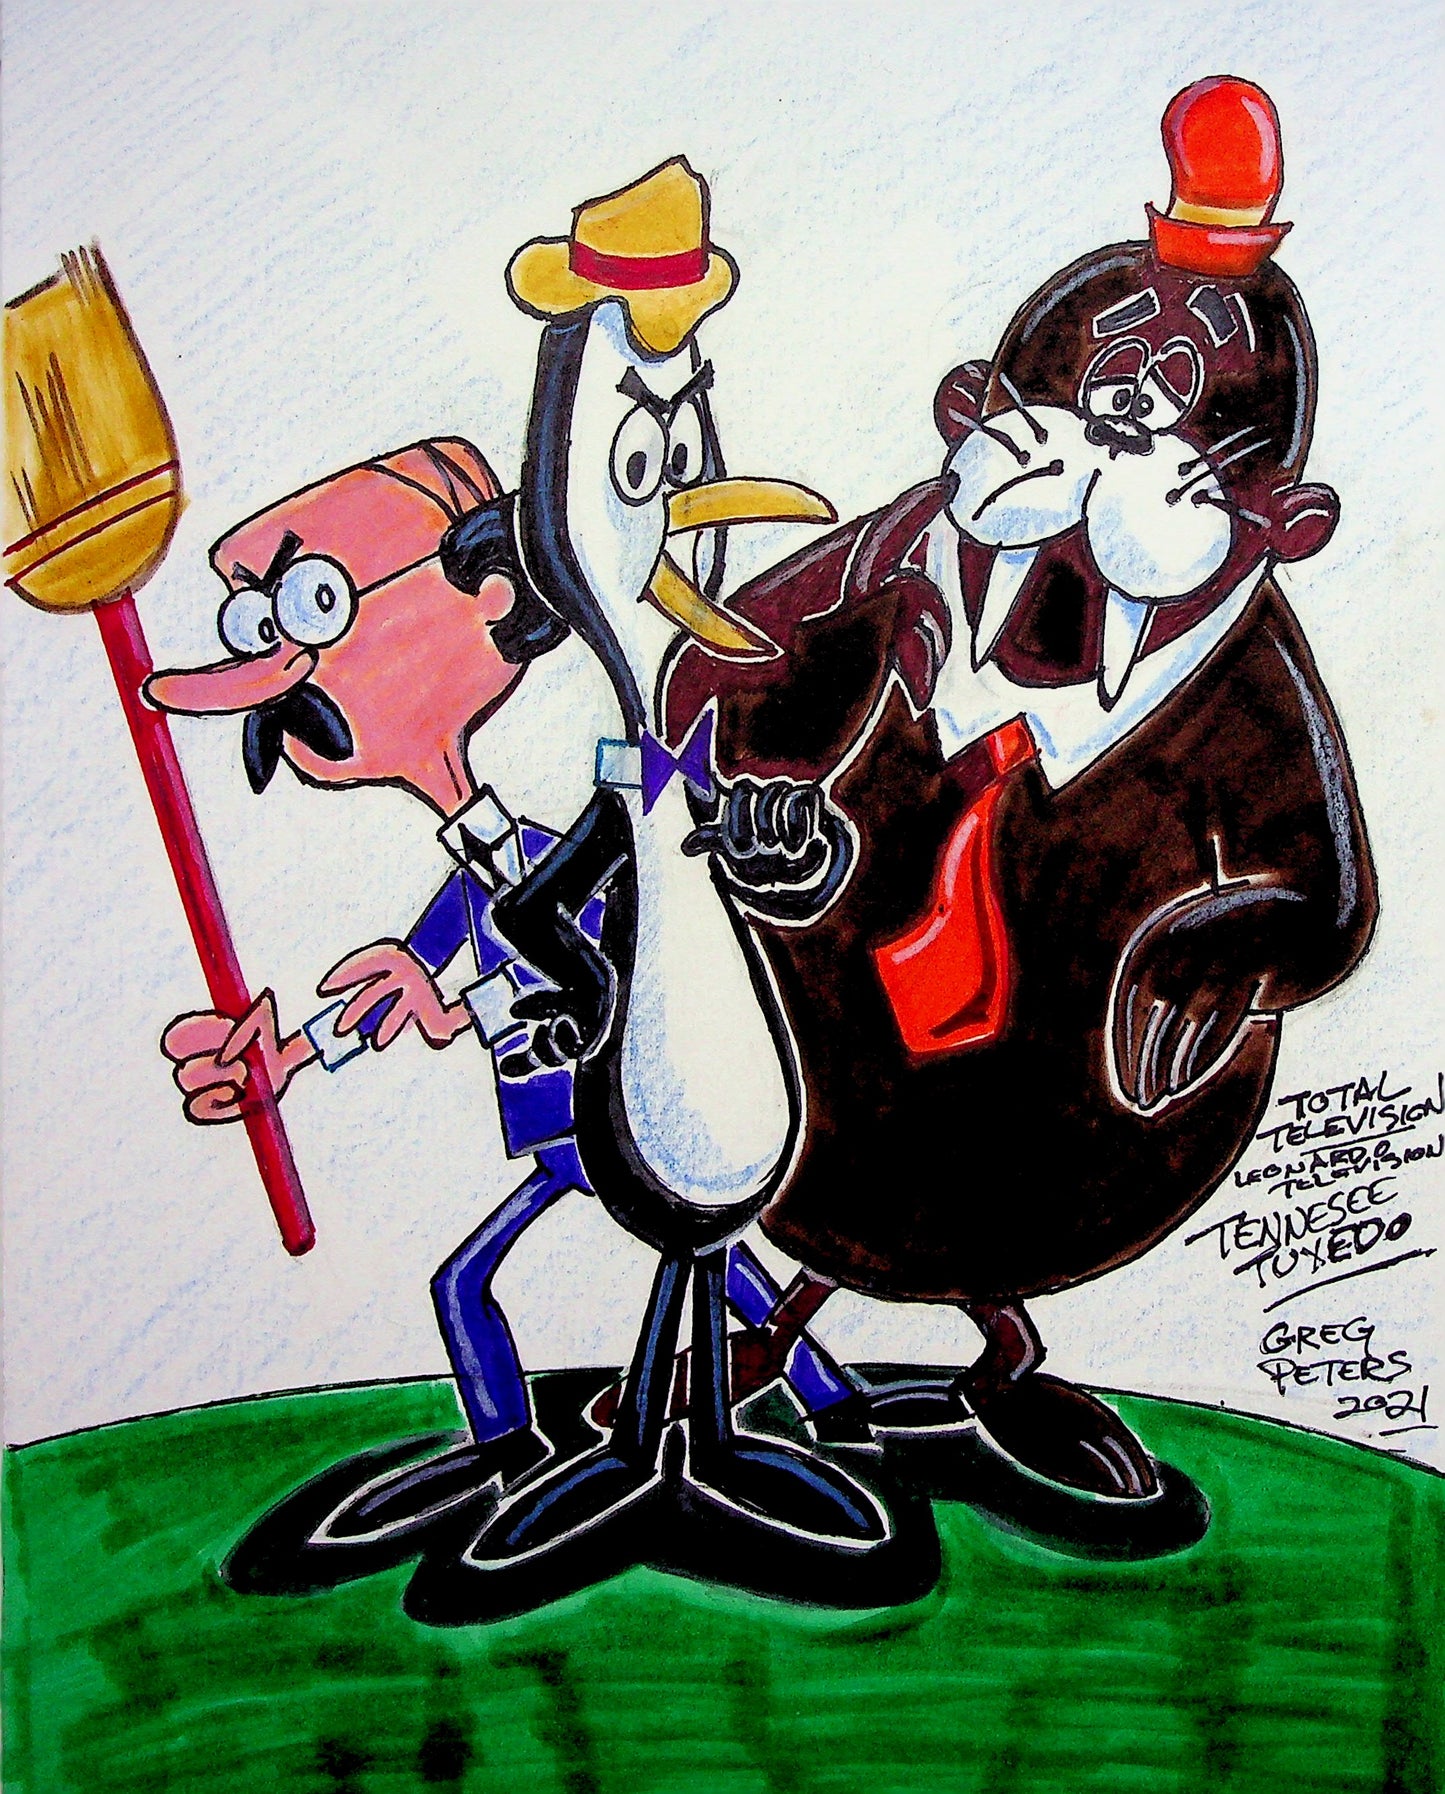 Greg Peters Signed Hand Painted Animation Art